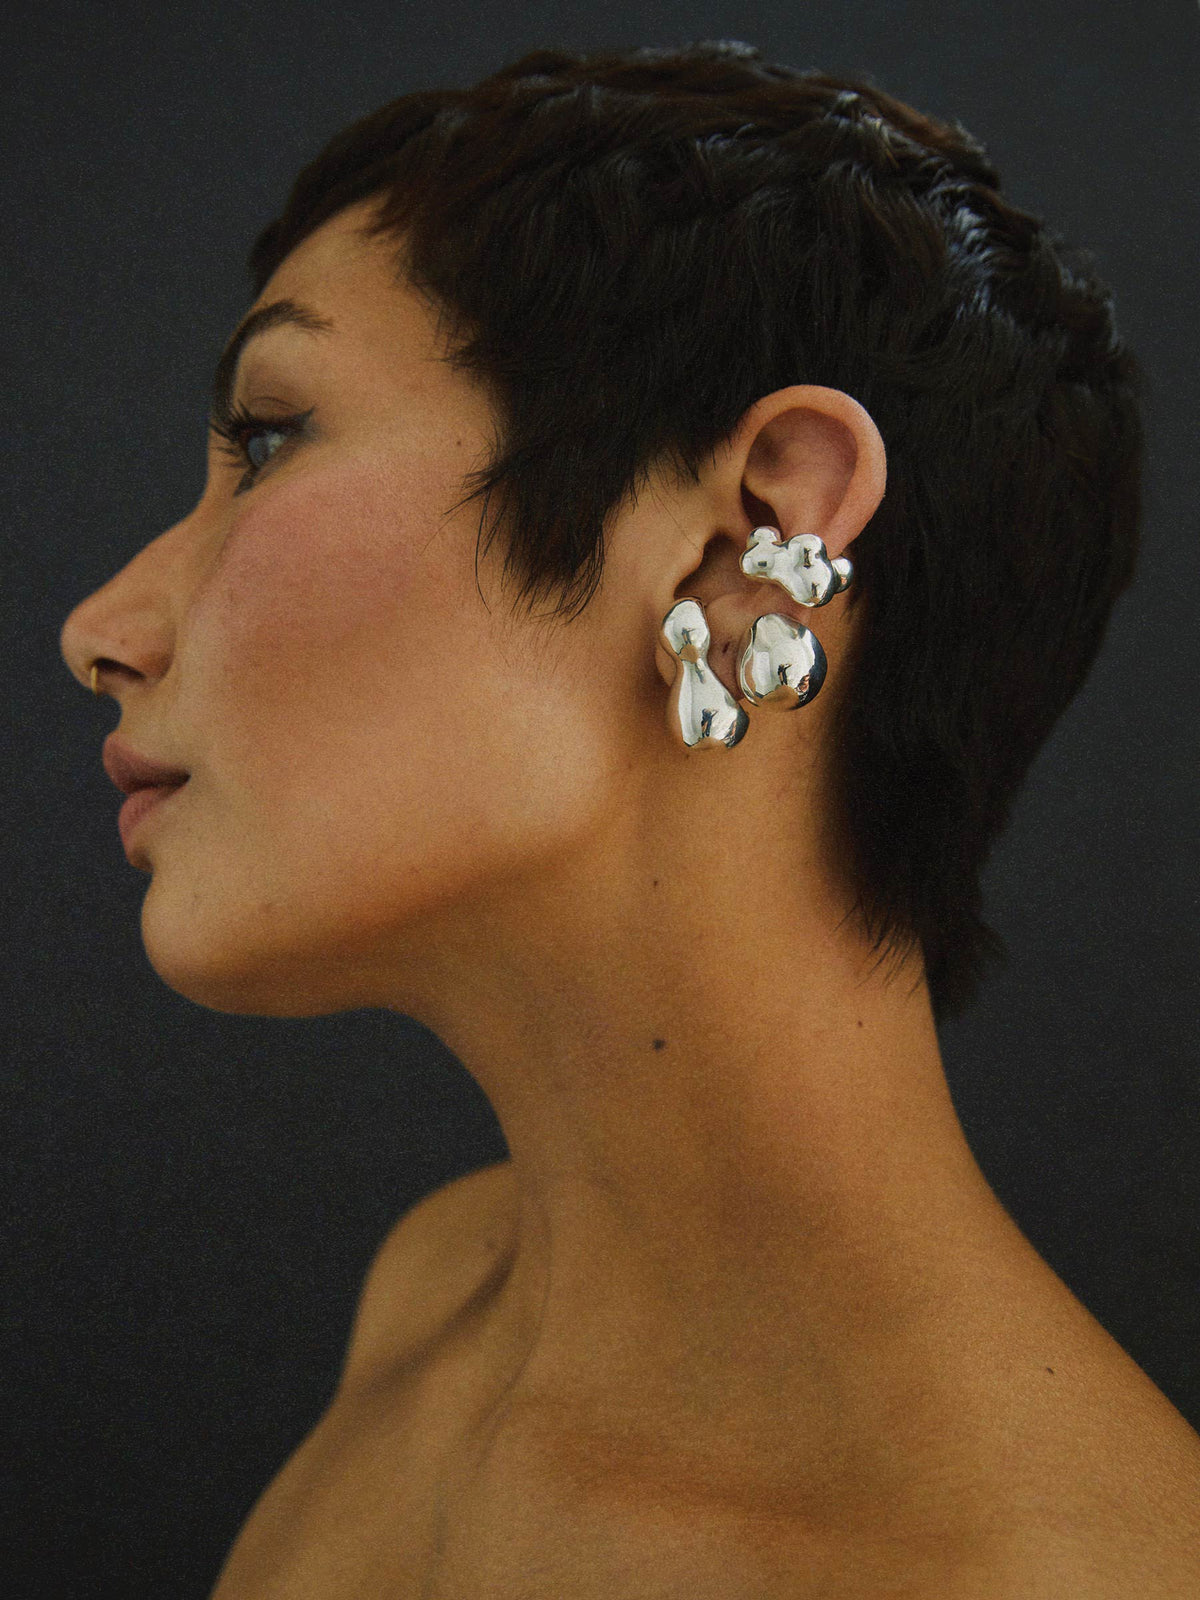 FARIS KUMO Ear Cuff in sterling silver worn on model, styled with SUMO Stud and BOLO Stud, both in sterling silver